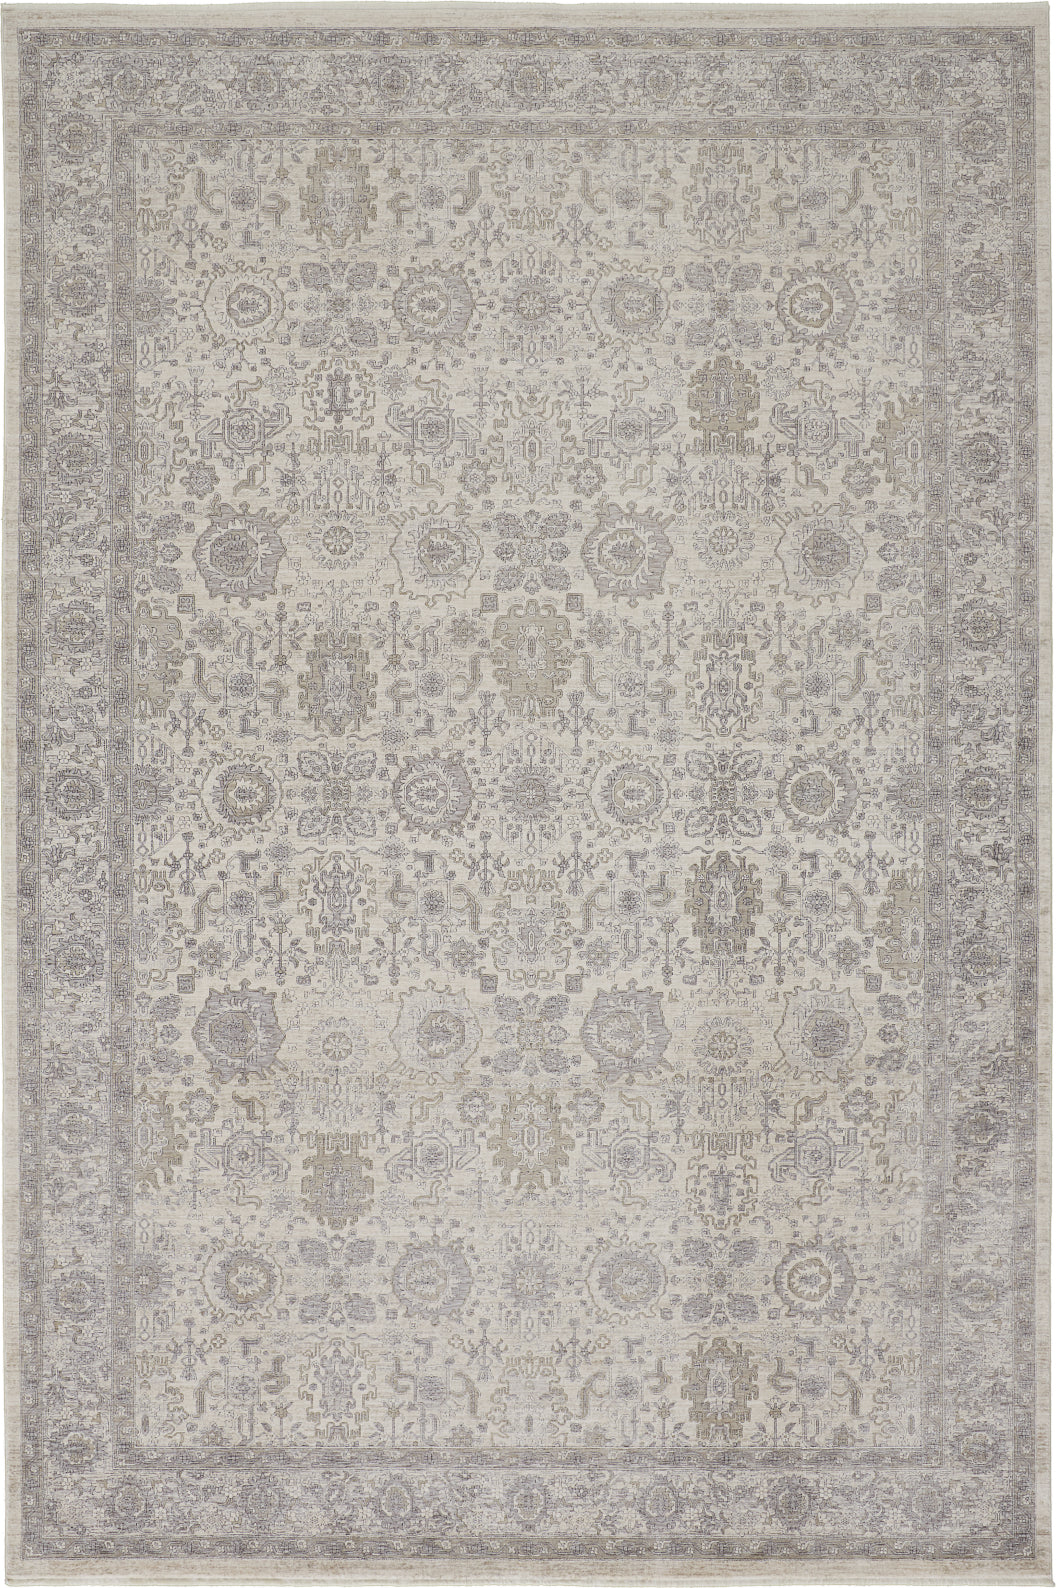 Feizy Marquette 3776F Beige/Gray Area Rug main image